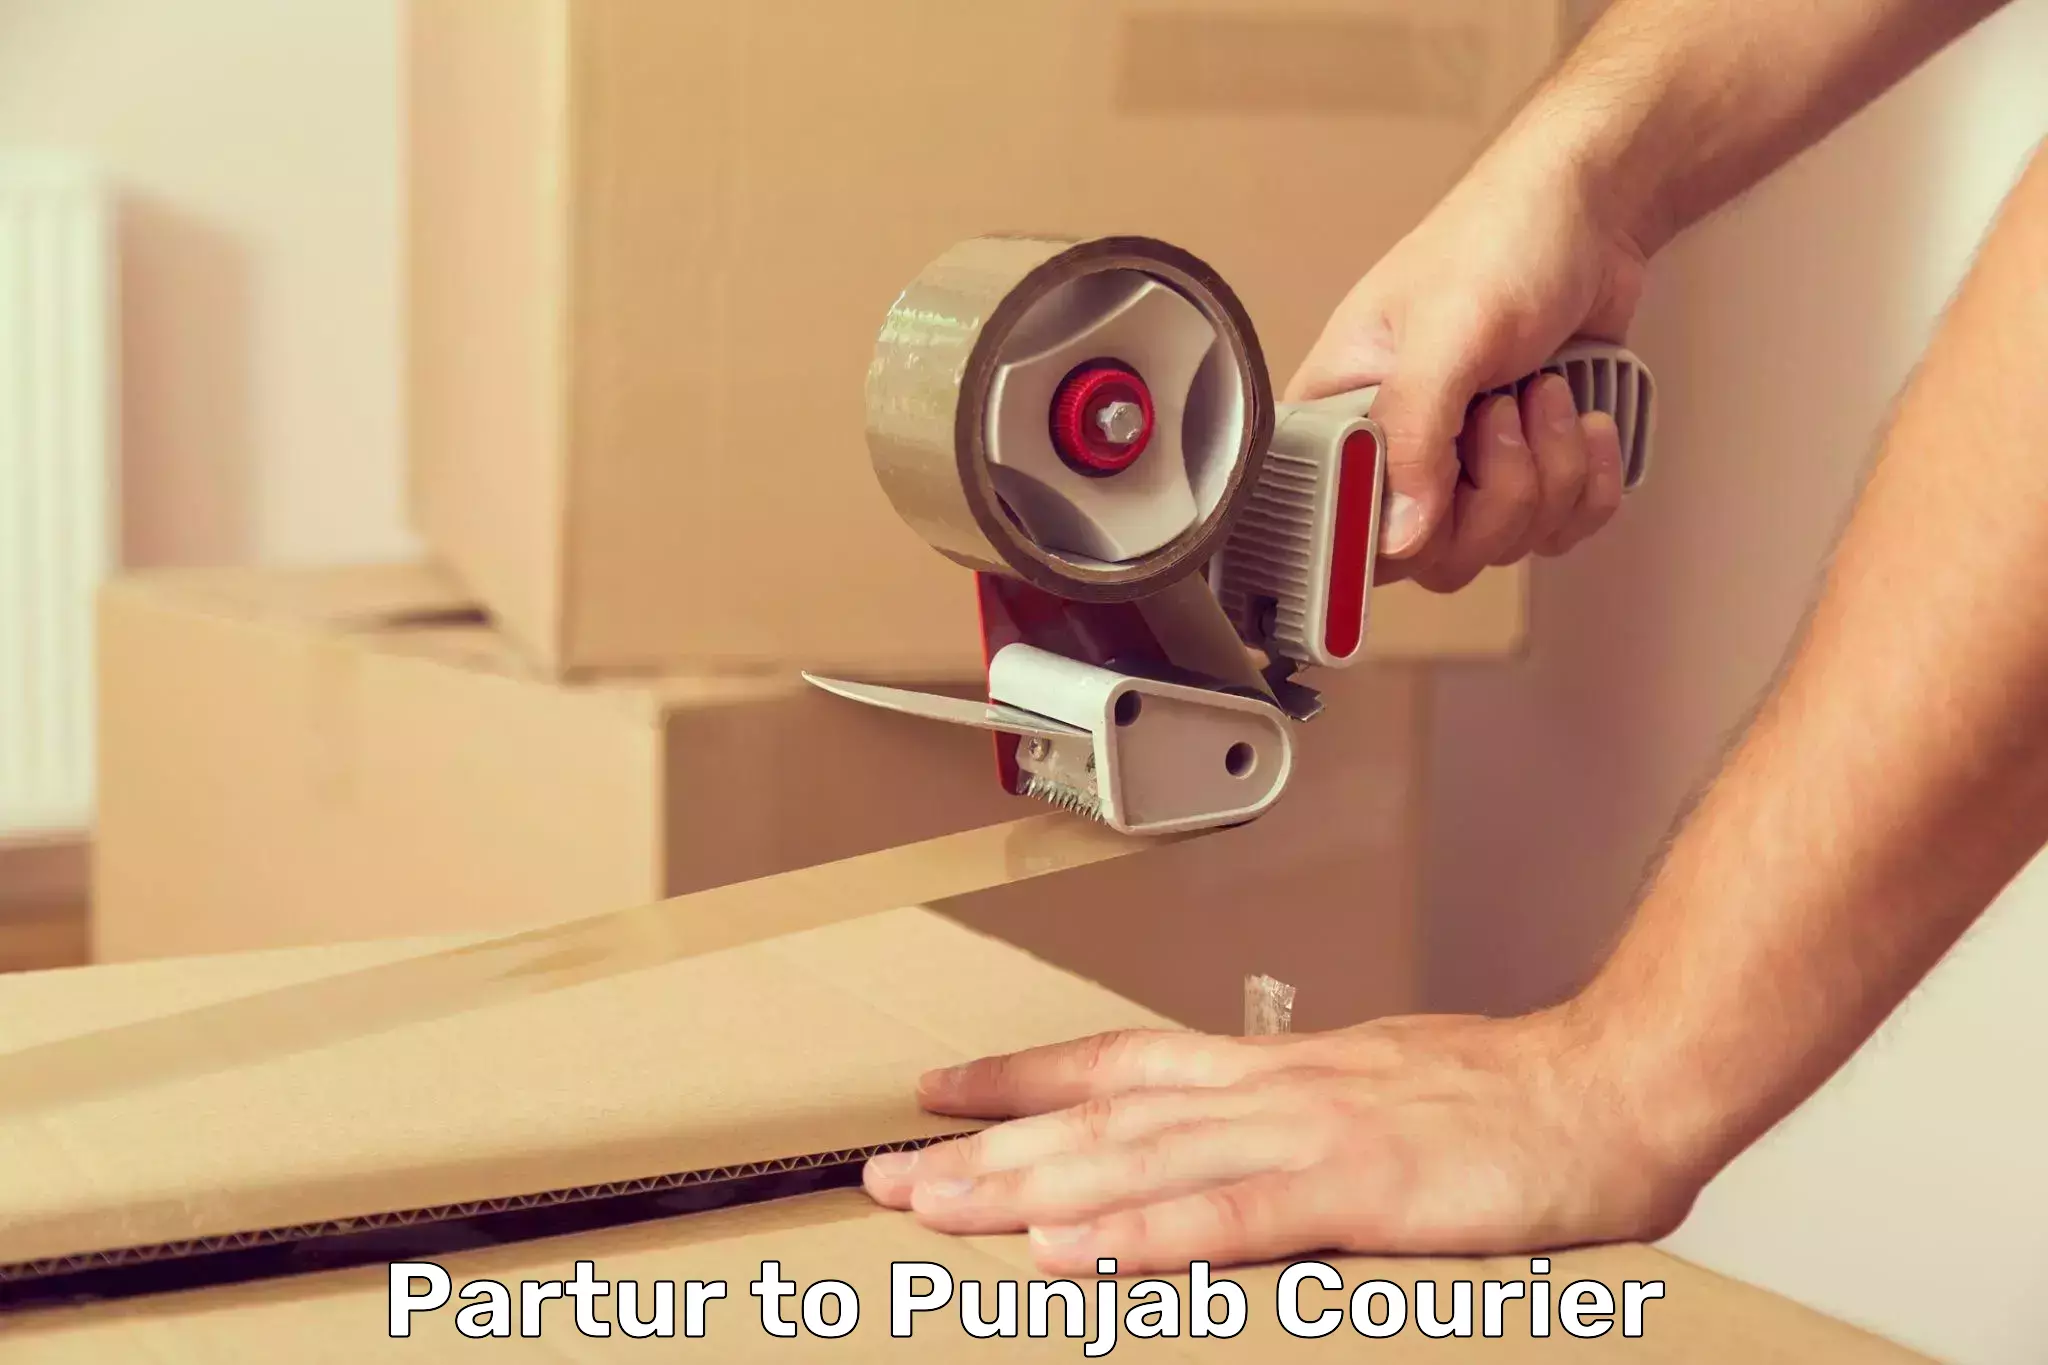 Nationwide shipping coverage Partur to Punjab